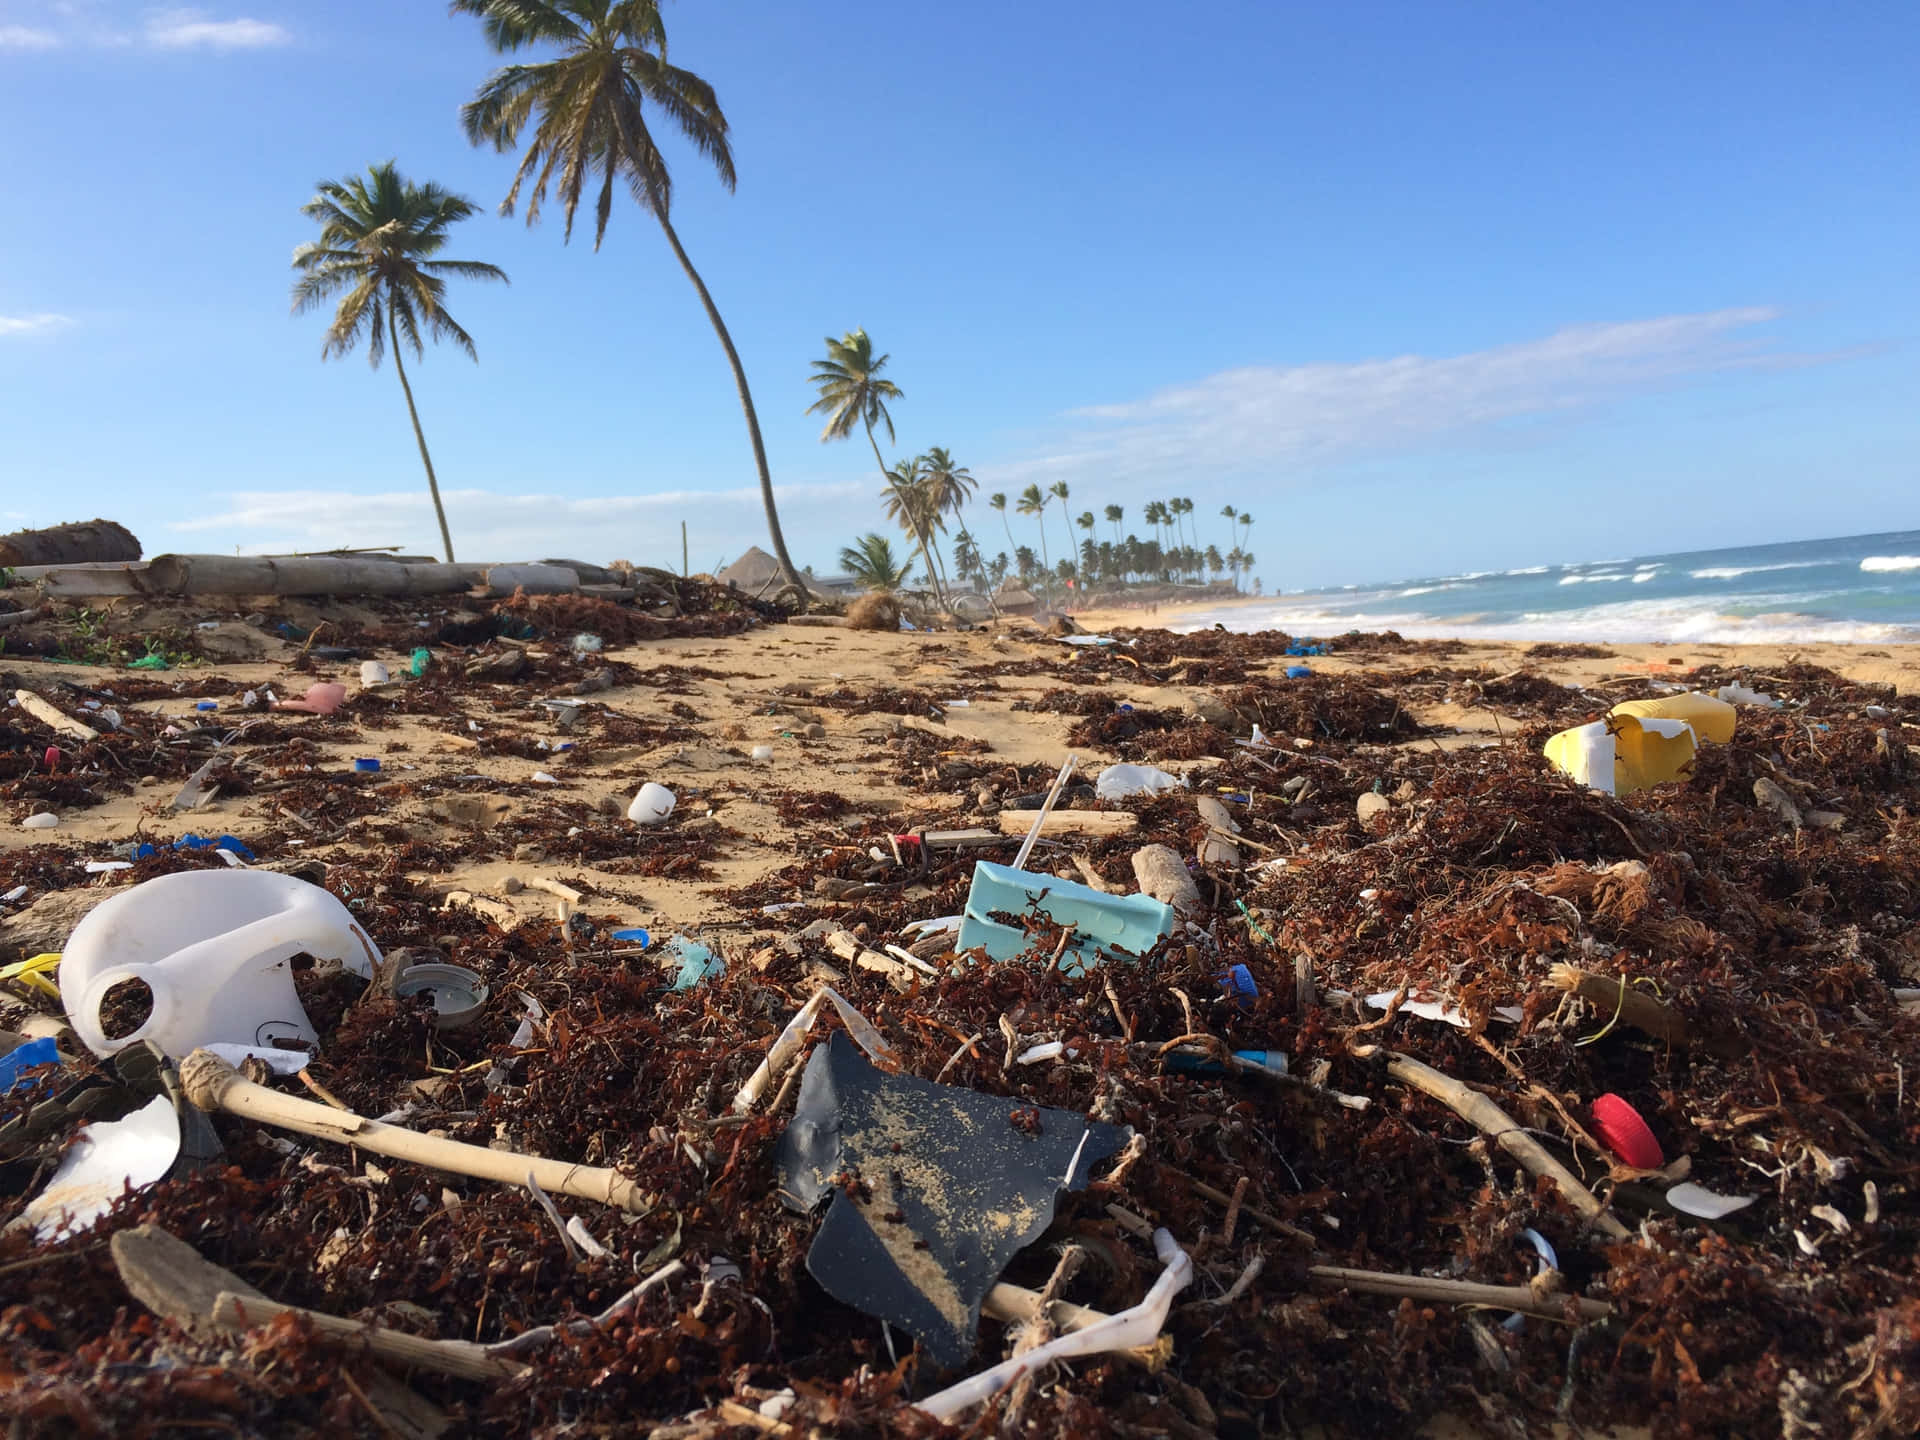 A Beach With Trash And Palm Trees